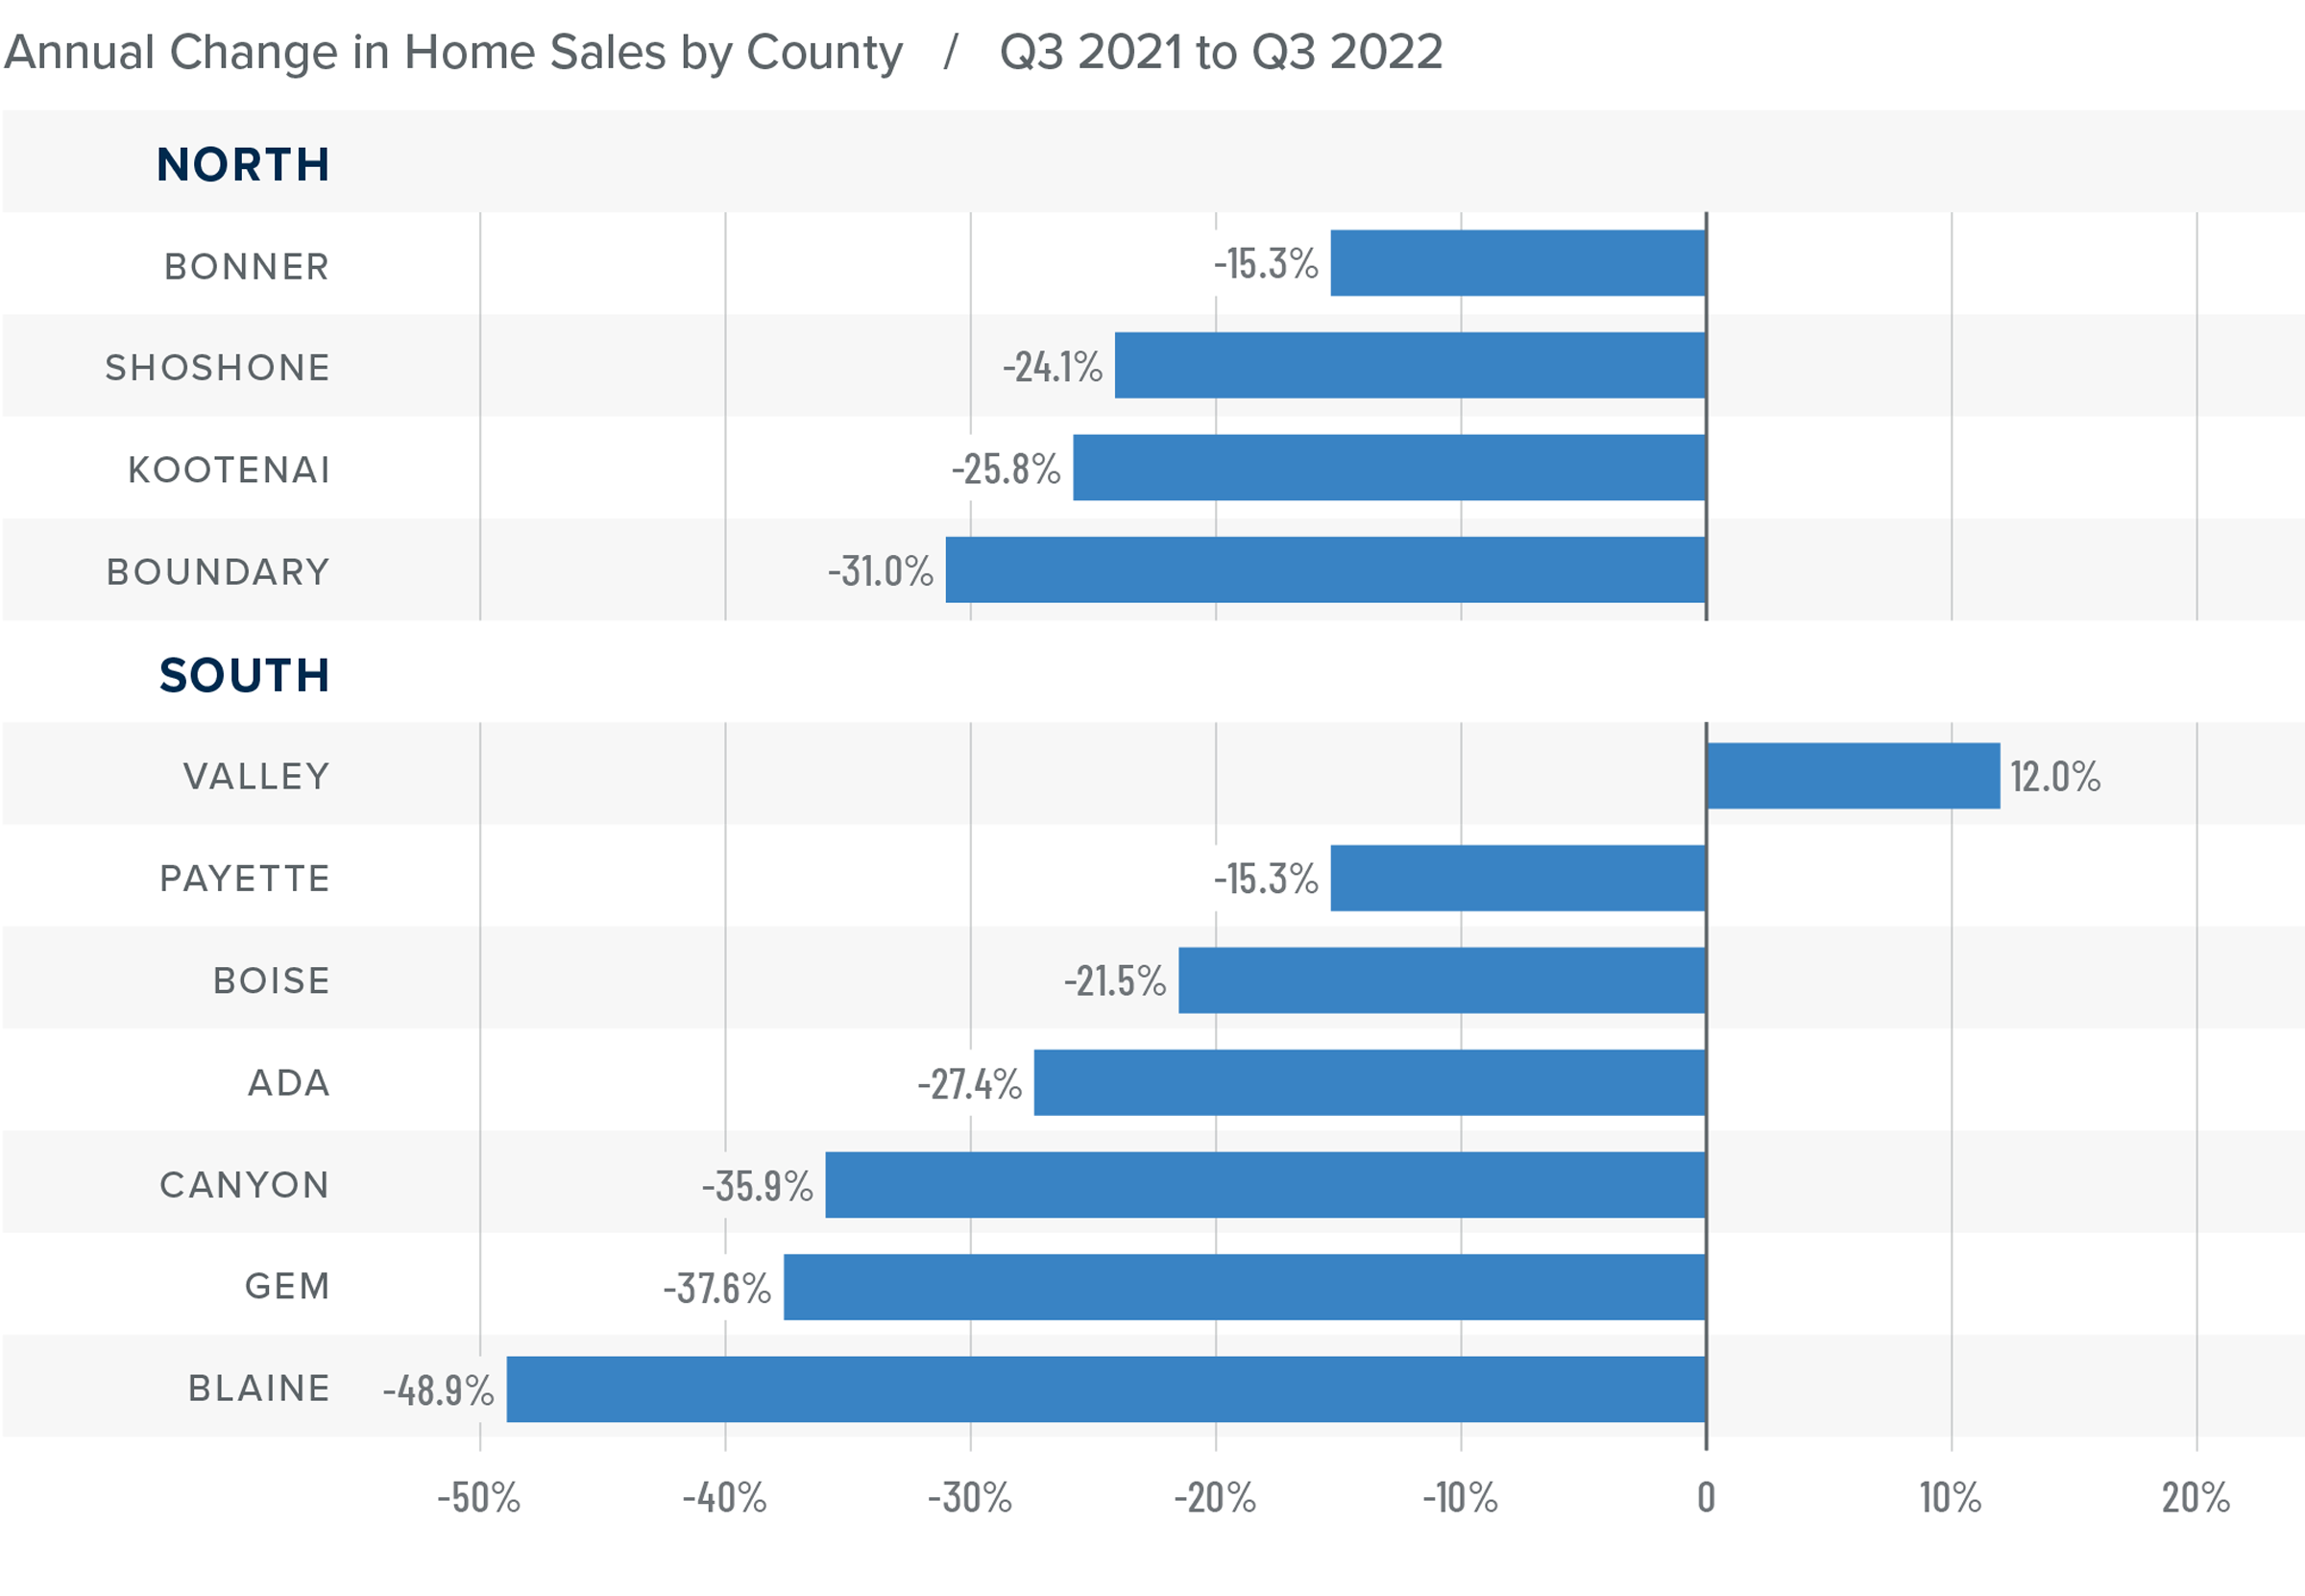 A bar graph showing the annual change in home sales for various counties in North and South Idaho from Q3 2021 to Q3 2022. All counties but one have a negative percentage year-over-year change. In North Idaho, Bonner County comes in at -15.3%, followed by Shoshone at -24.1%, Kootenai -25.8%, and Boundary -31%. In South Idaho, Valley comes in at 12%, followed by Payette -15.3%, Boise -21.5%, Ada -27.4%, Canyon -35.9%, Gem -37.6%, and Blaine at -48.9%.